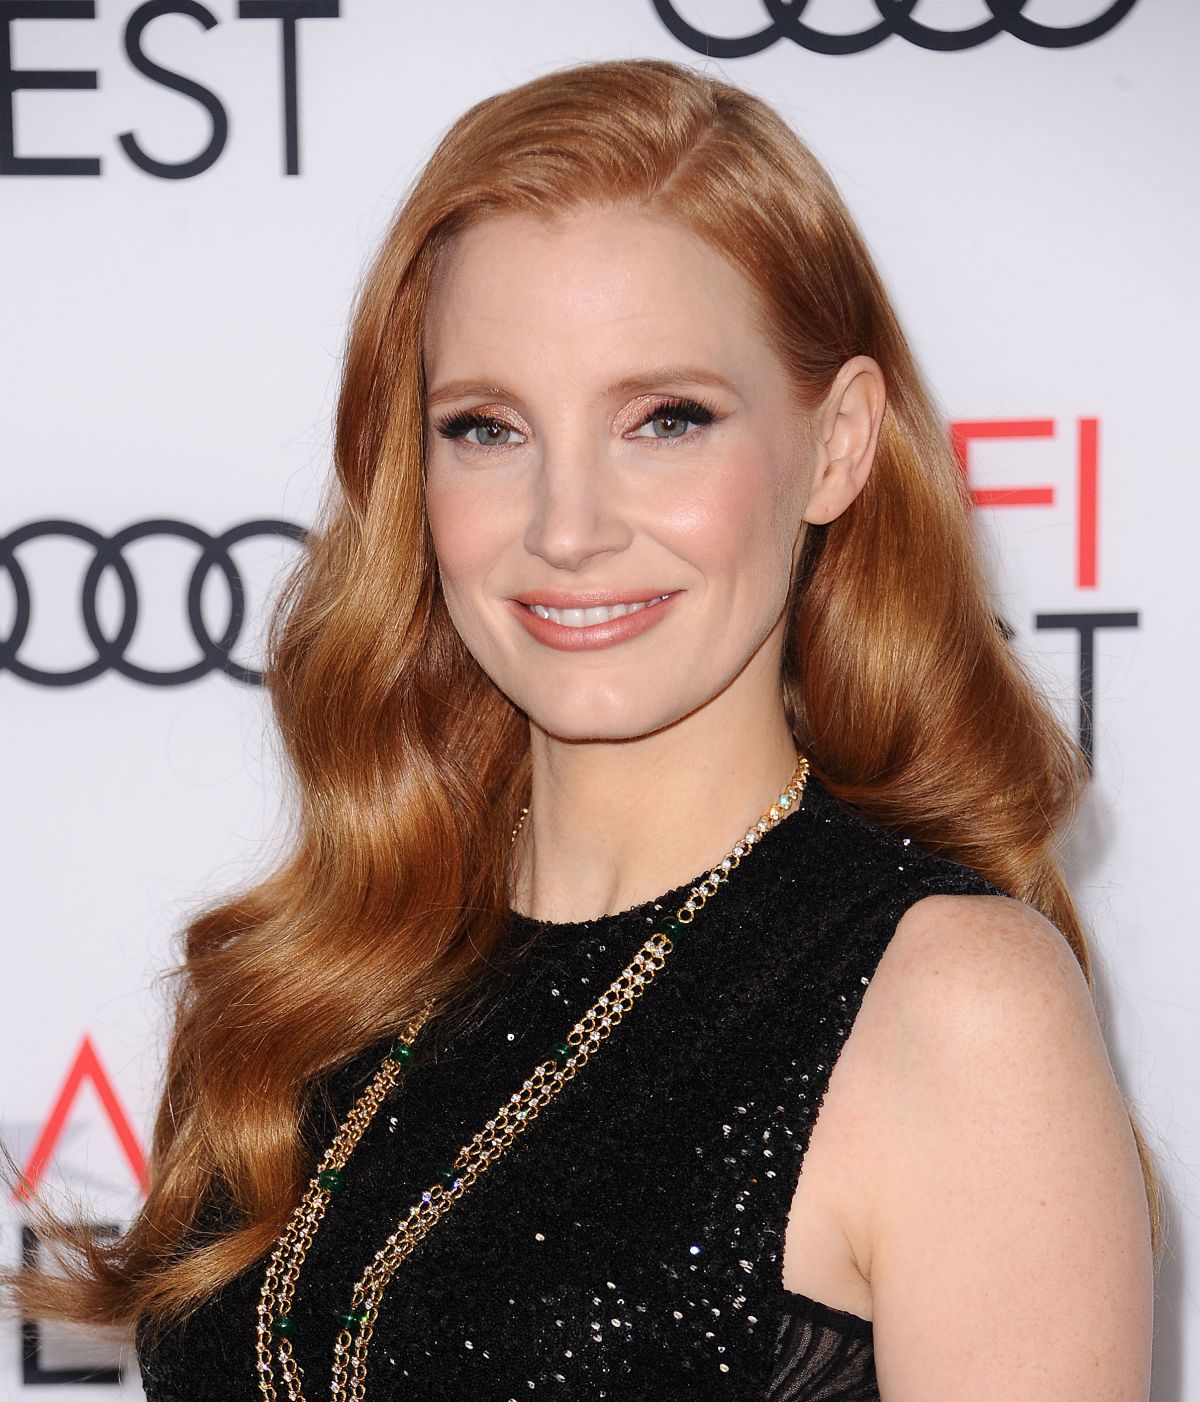 JESSICA CHASTAIN at Closing Night Gala Screening of Molly’s Game AFI ...